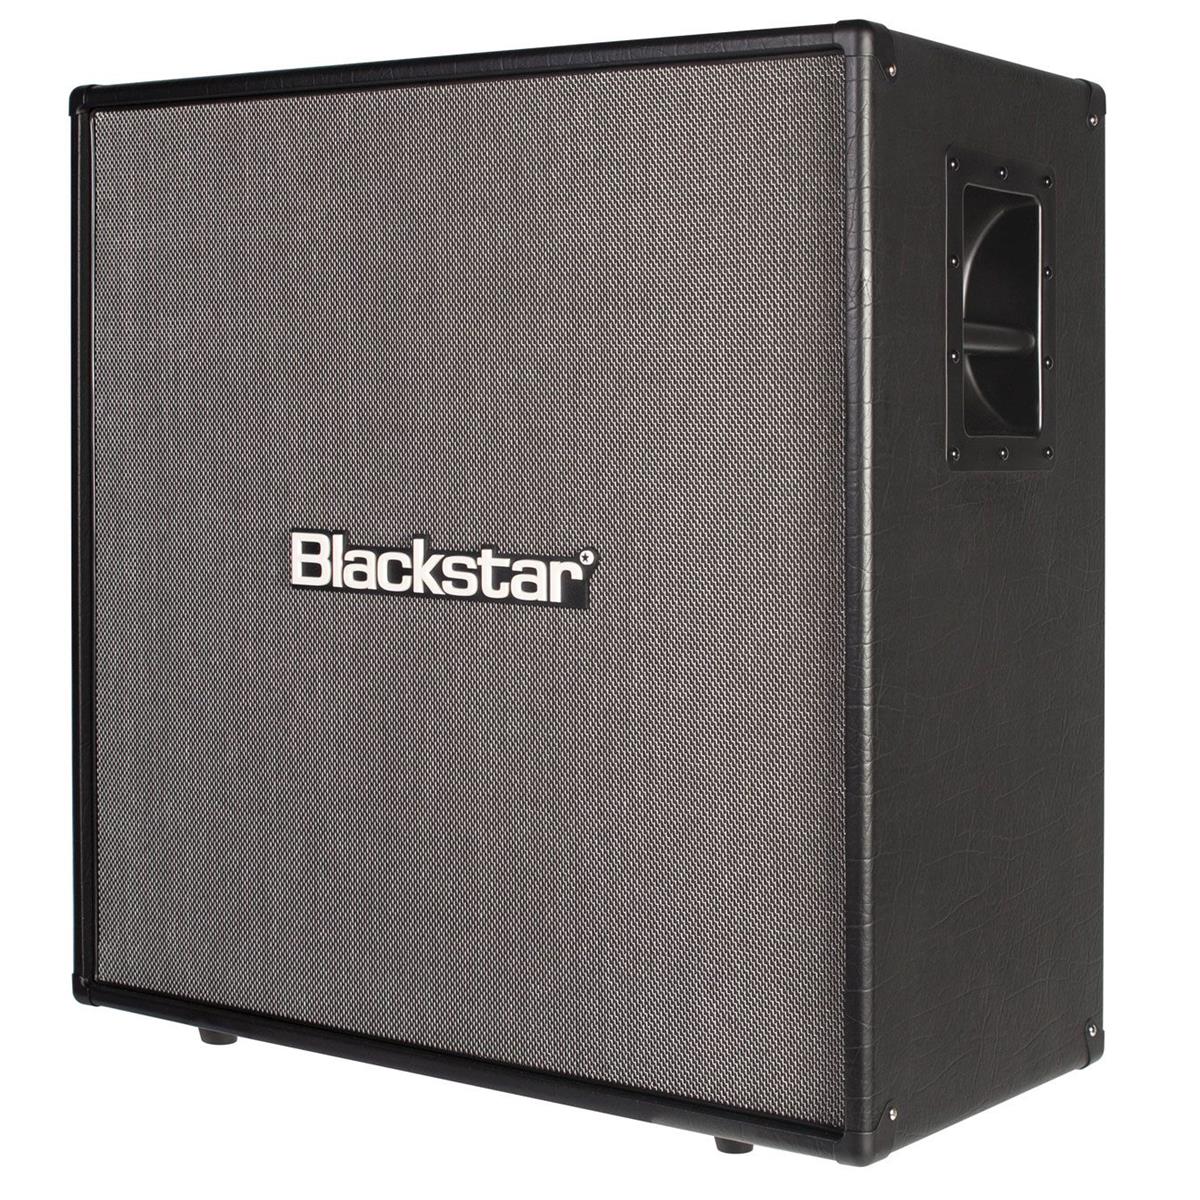 Image of Blackstar HTV-412B MKII 320W 4x12 Speaker Cabinet for Electric Guitar Amplifiers